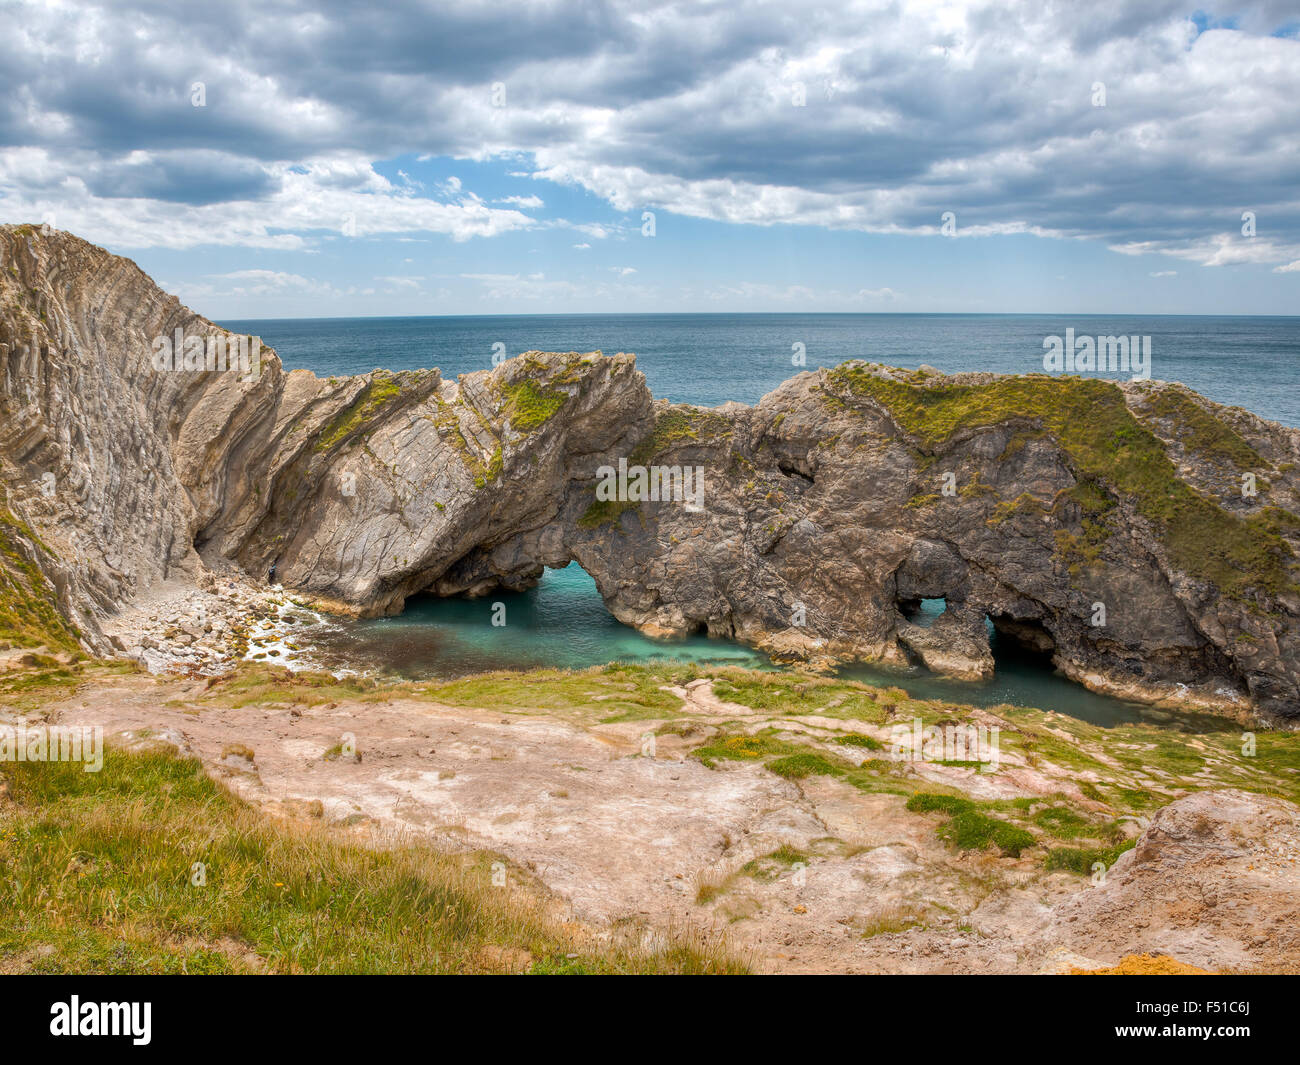 Stair Hole cove and rock arches near Lulworth Cove Dorset Dorset England UK Europe Stock Photo